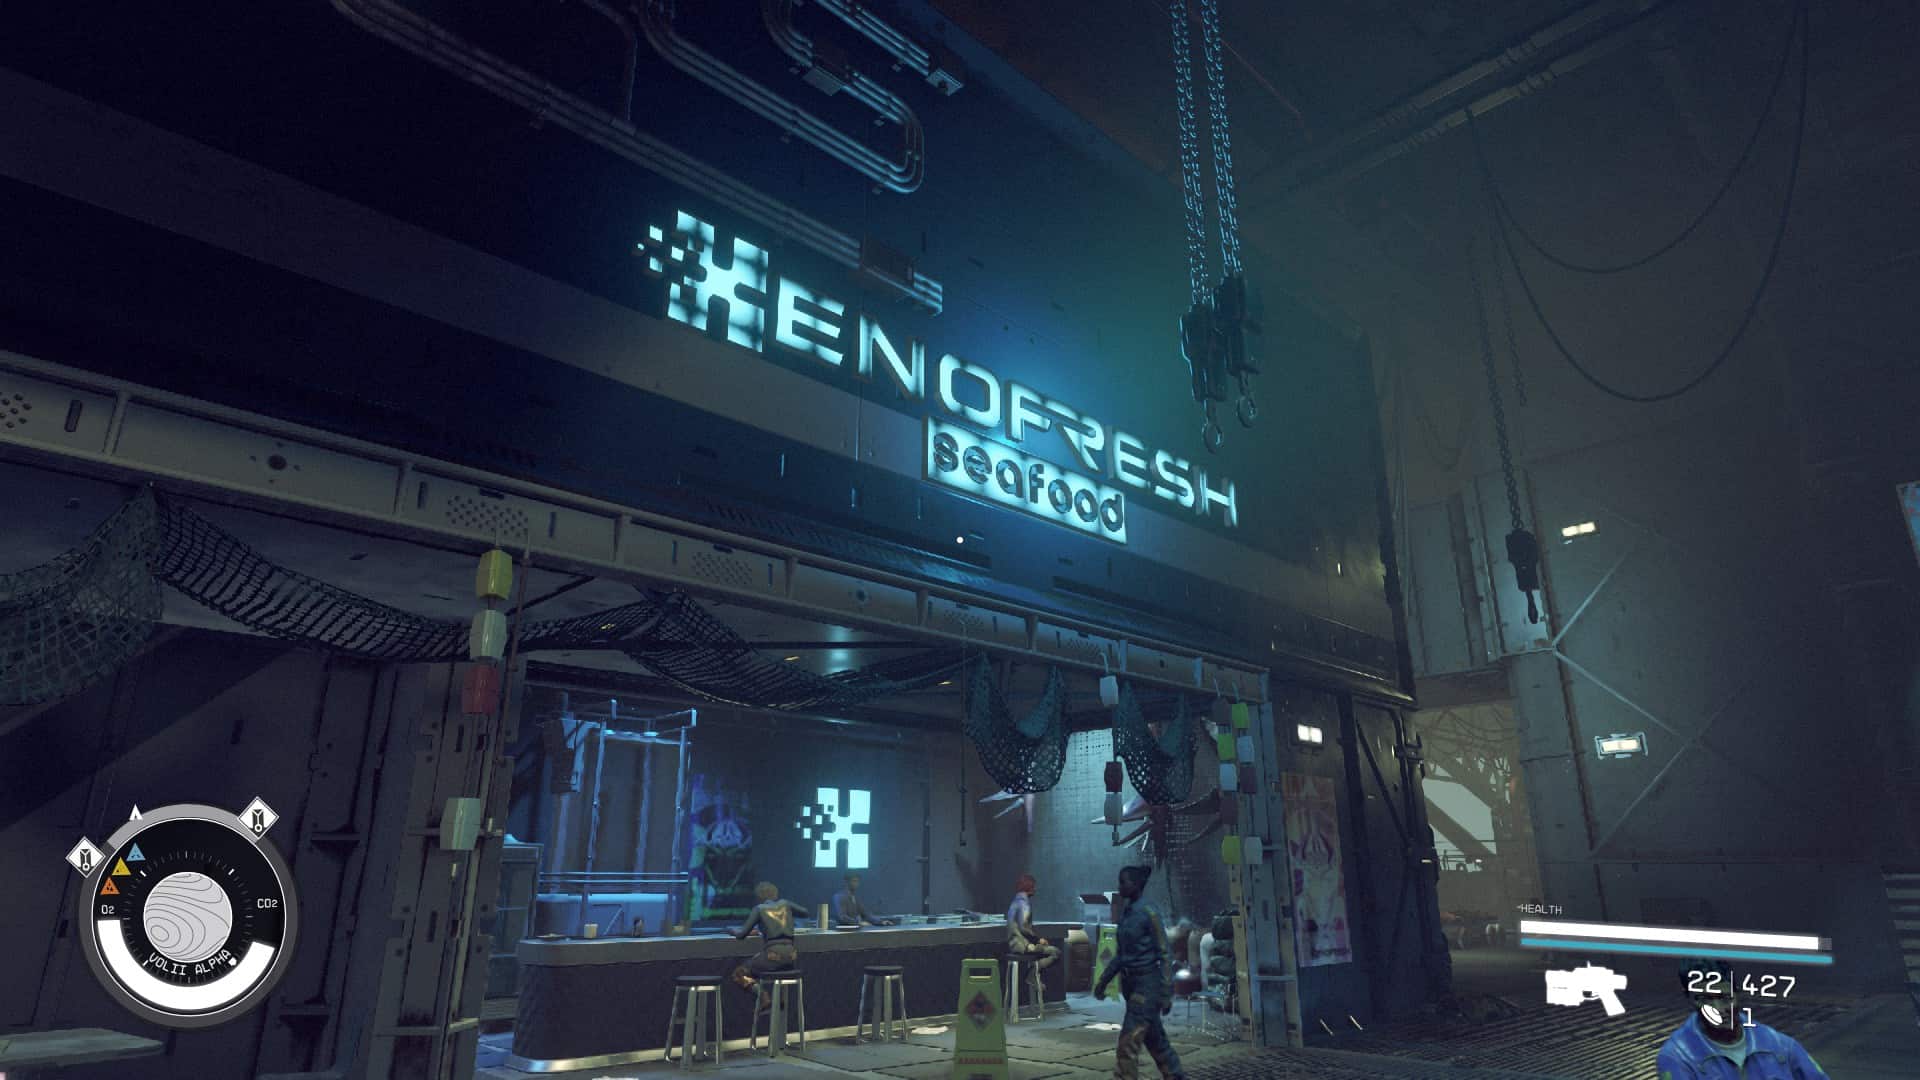 Starfield Neon shops: The front of the Xenofresh Seafood shop.